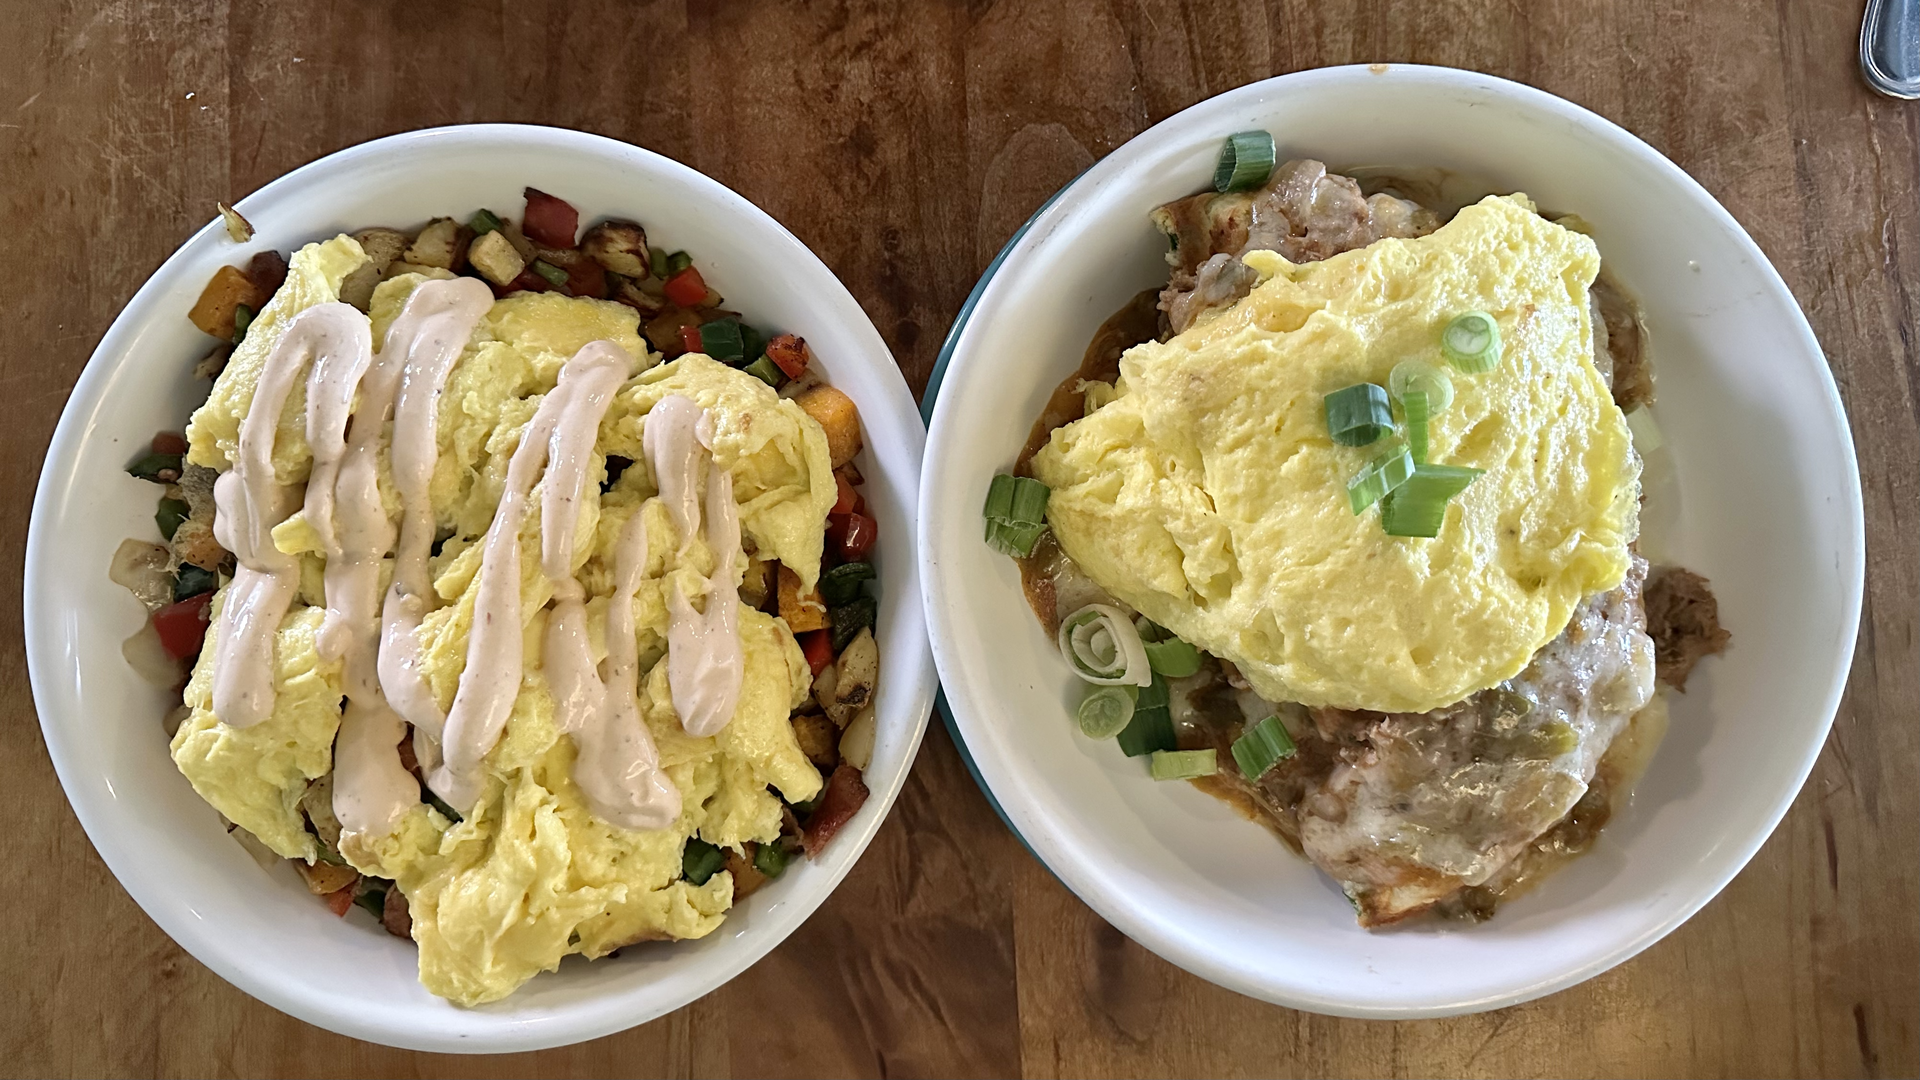 The Myrtle Hill hash and the cornmeal waffle with pork green chile. Photo: John Frank/Axios